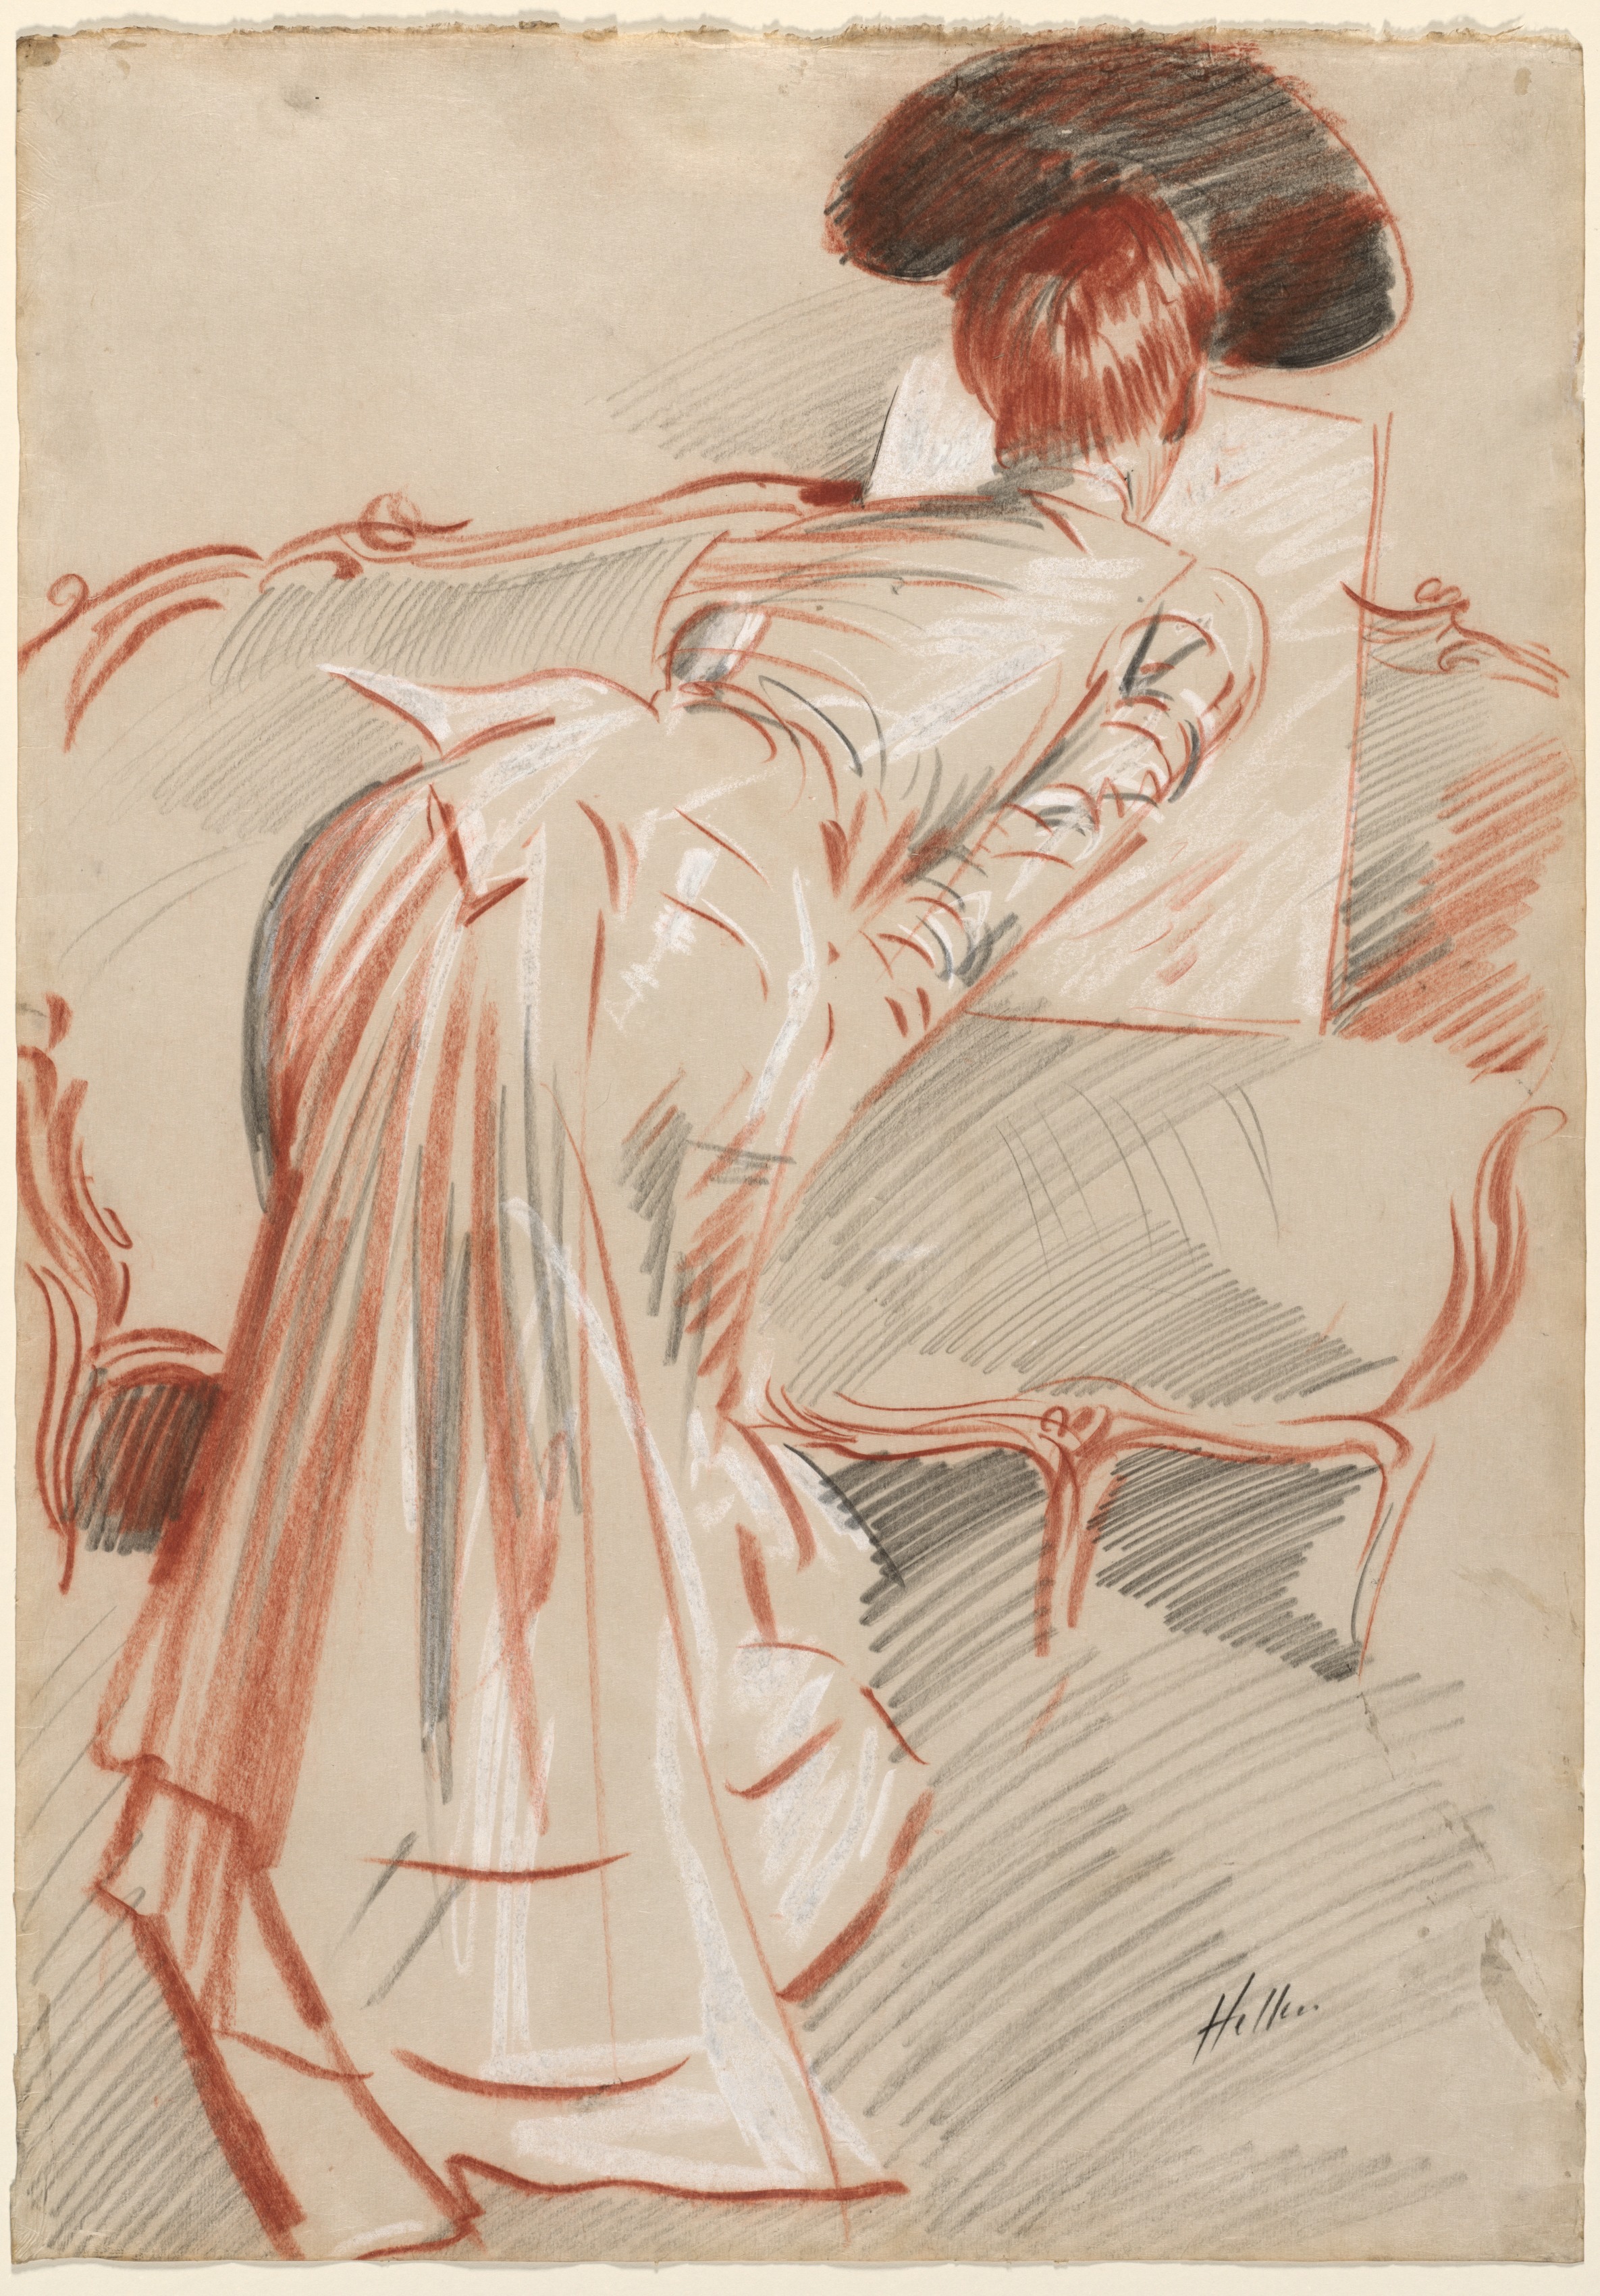 Woman (Possibly Madame Alice Hellu) Looking at a Drawing